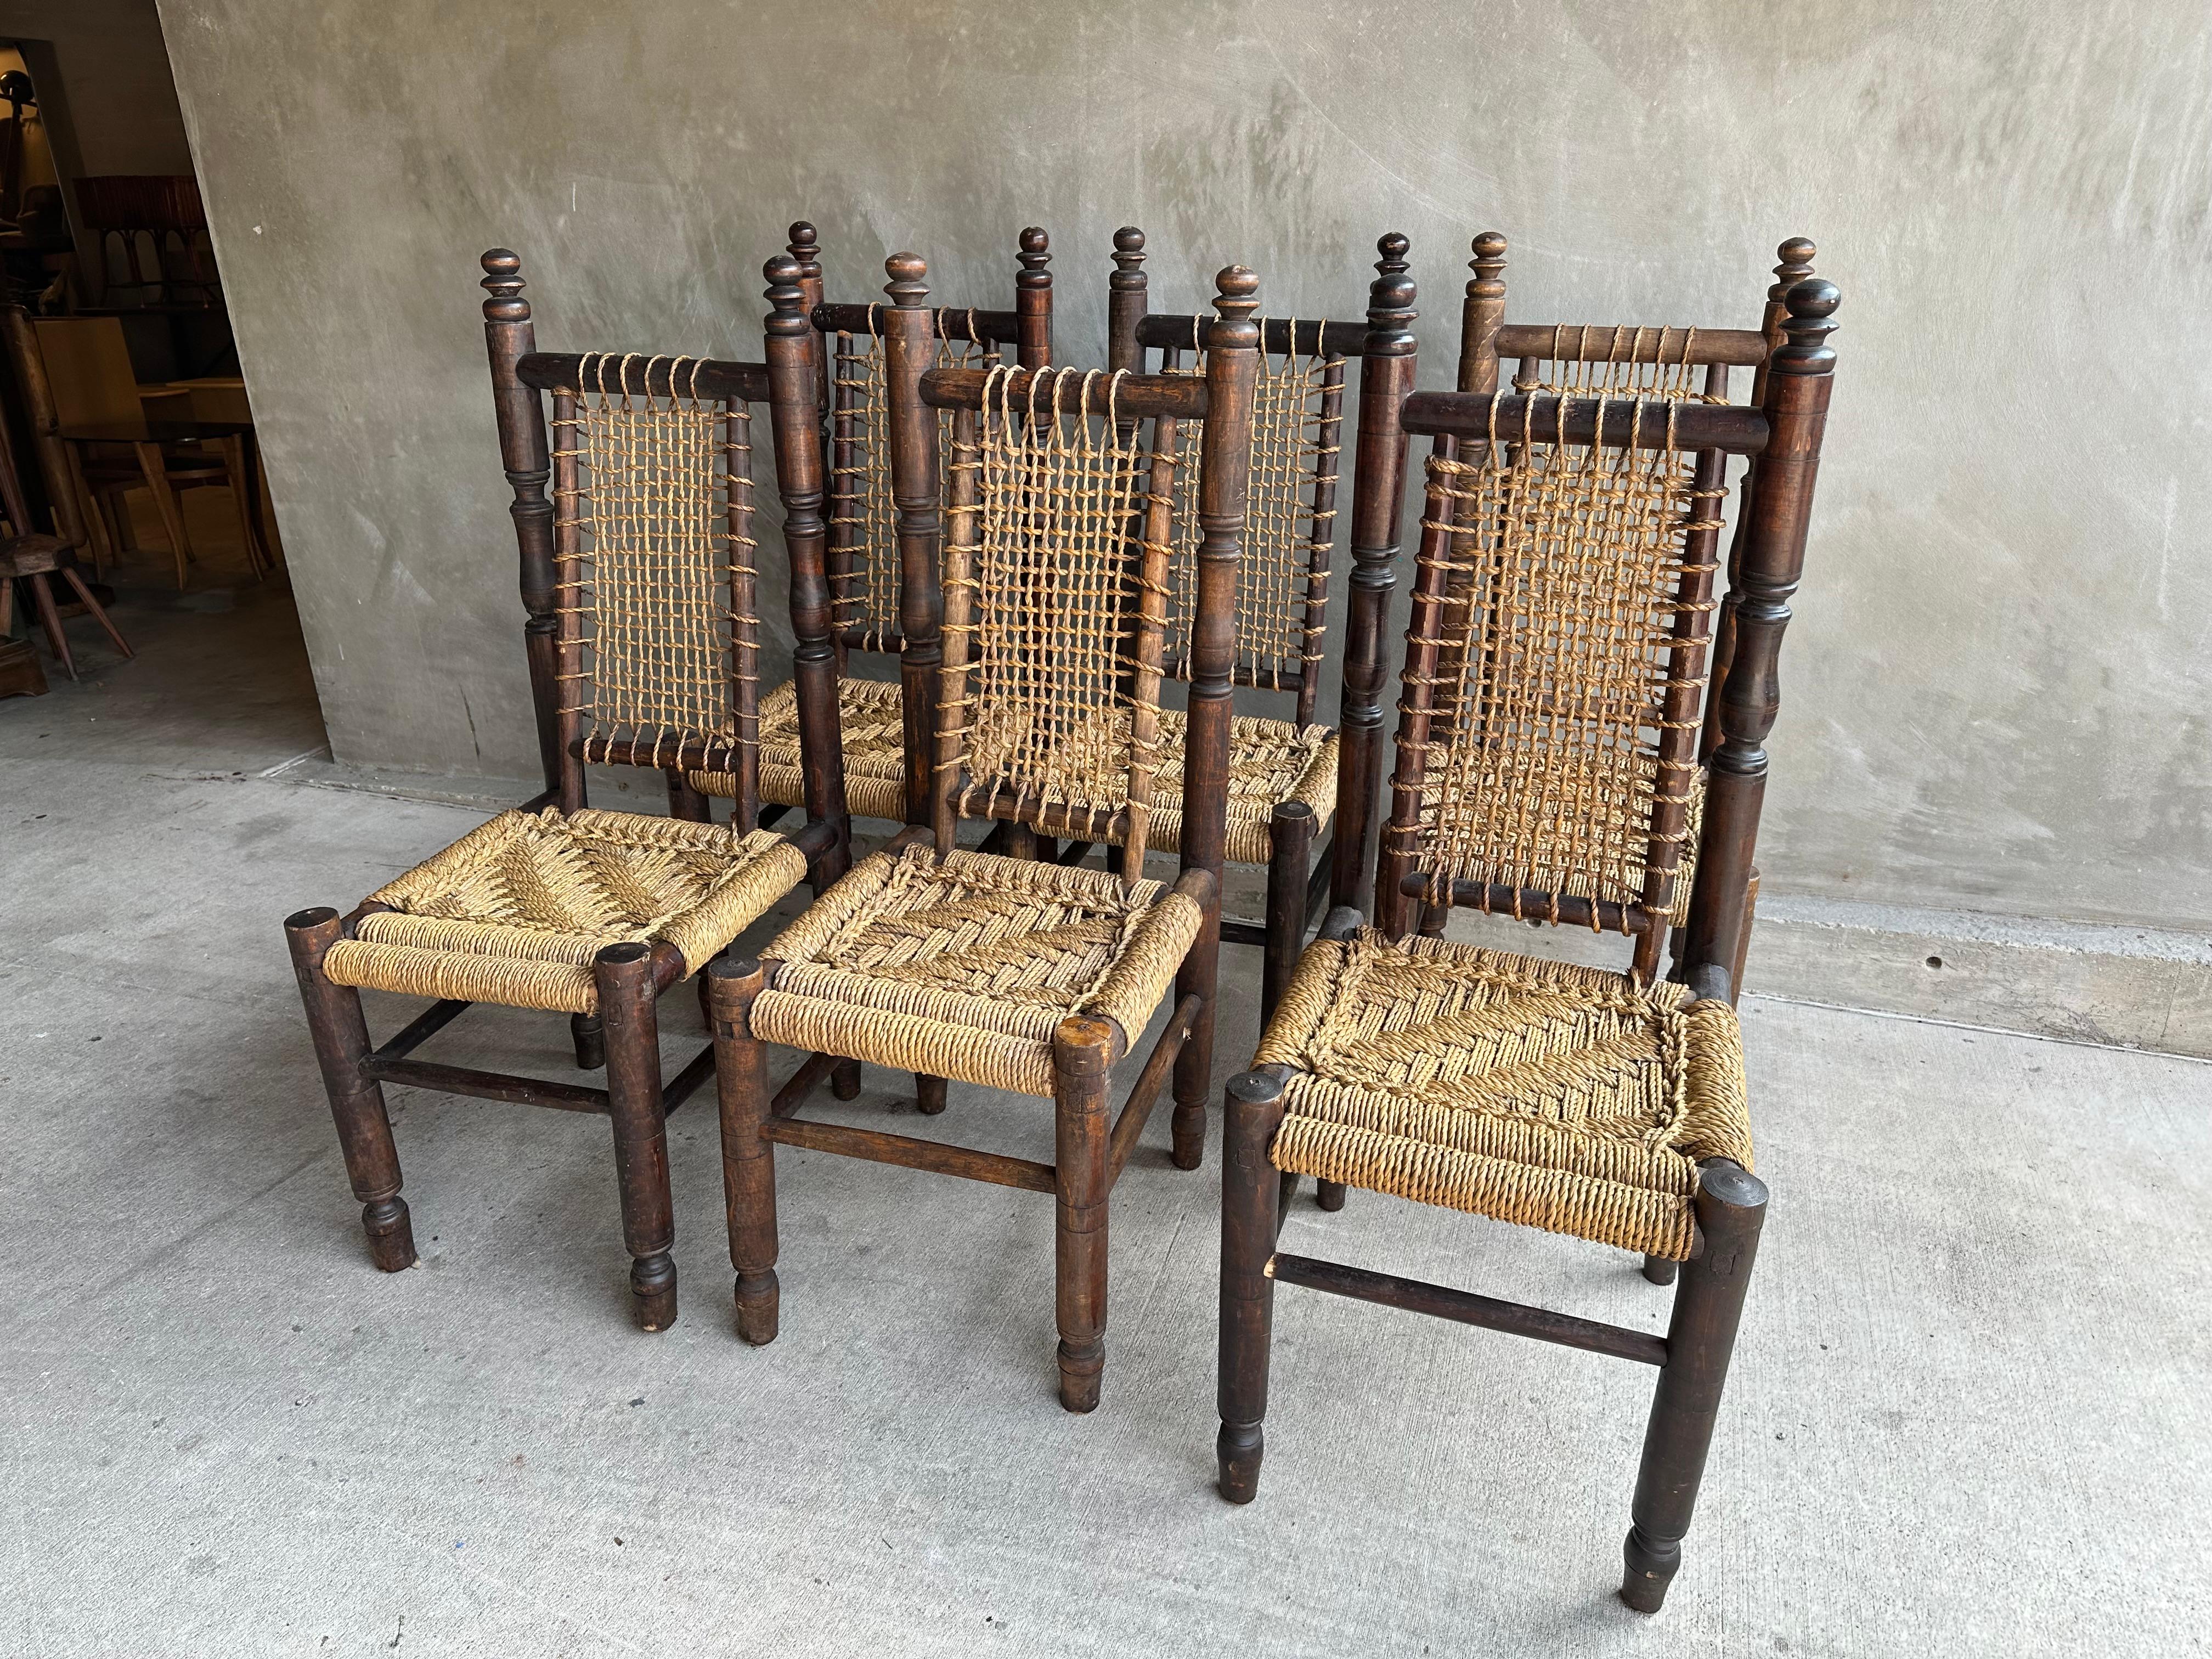 The South of France was home to the finest woven rope and rush furniture in the mid 20th century. Weaving artisans like Audoux and Minet are now highly sought after. This fine set of six high back dining chairs is in that tradition. Dark beech lathe